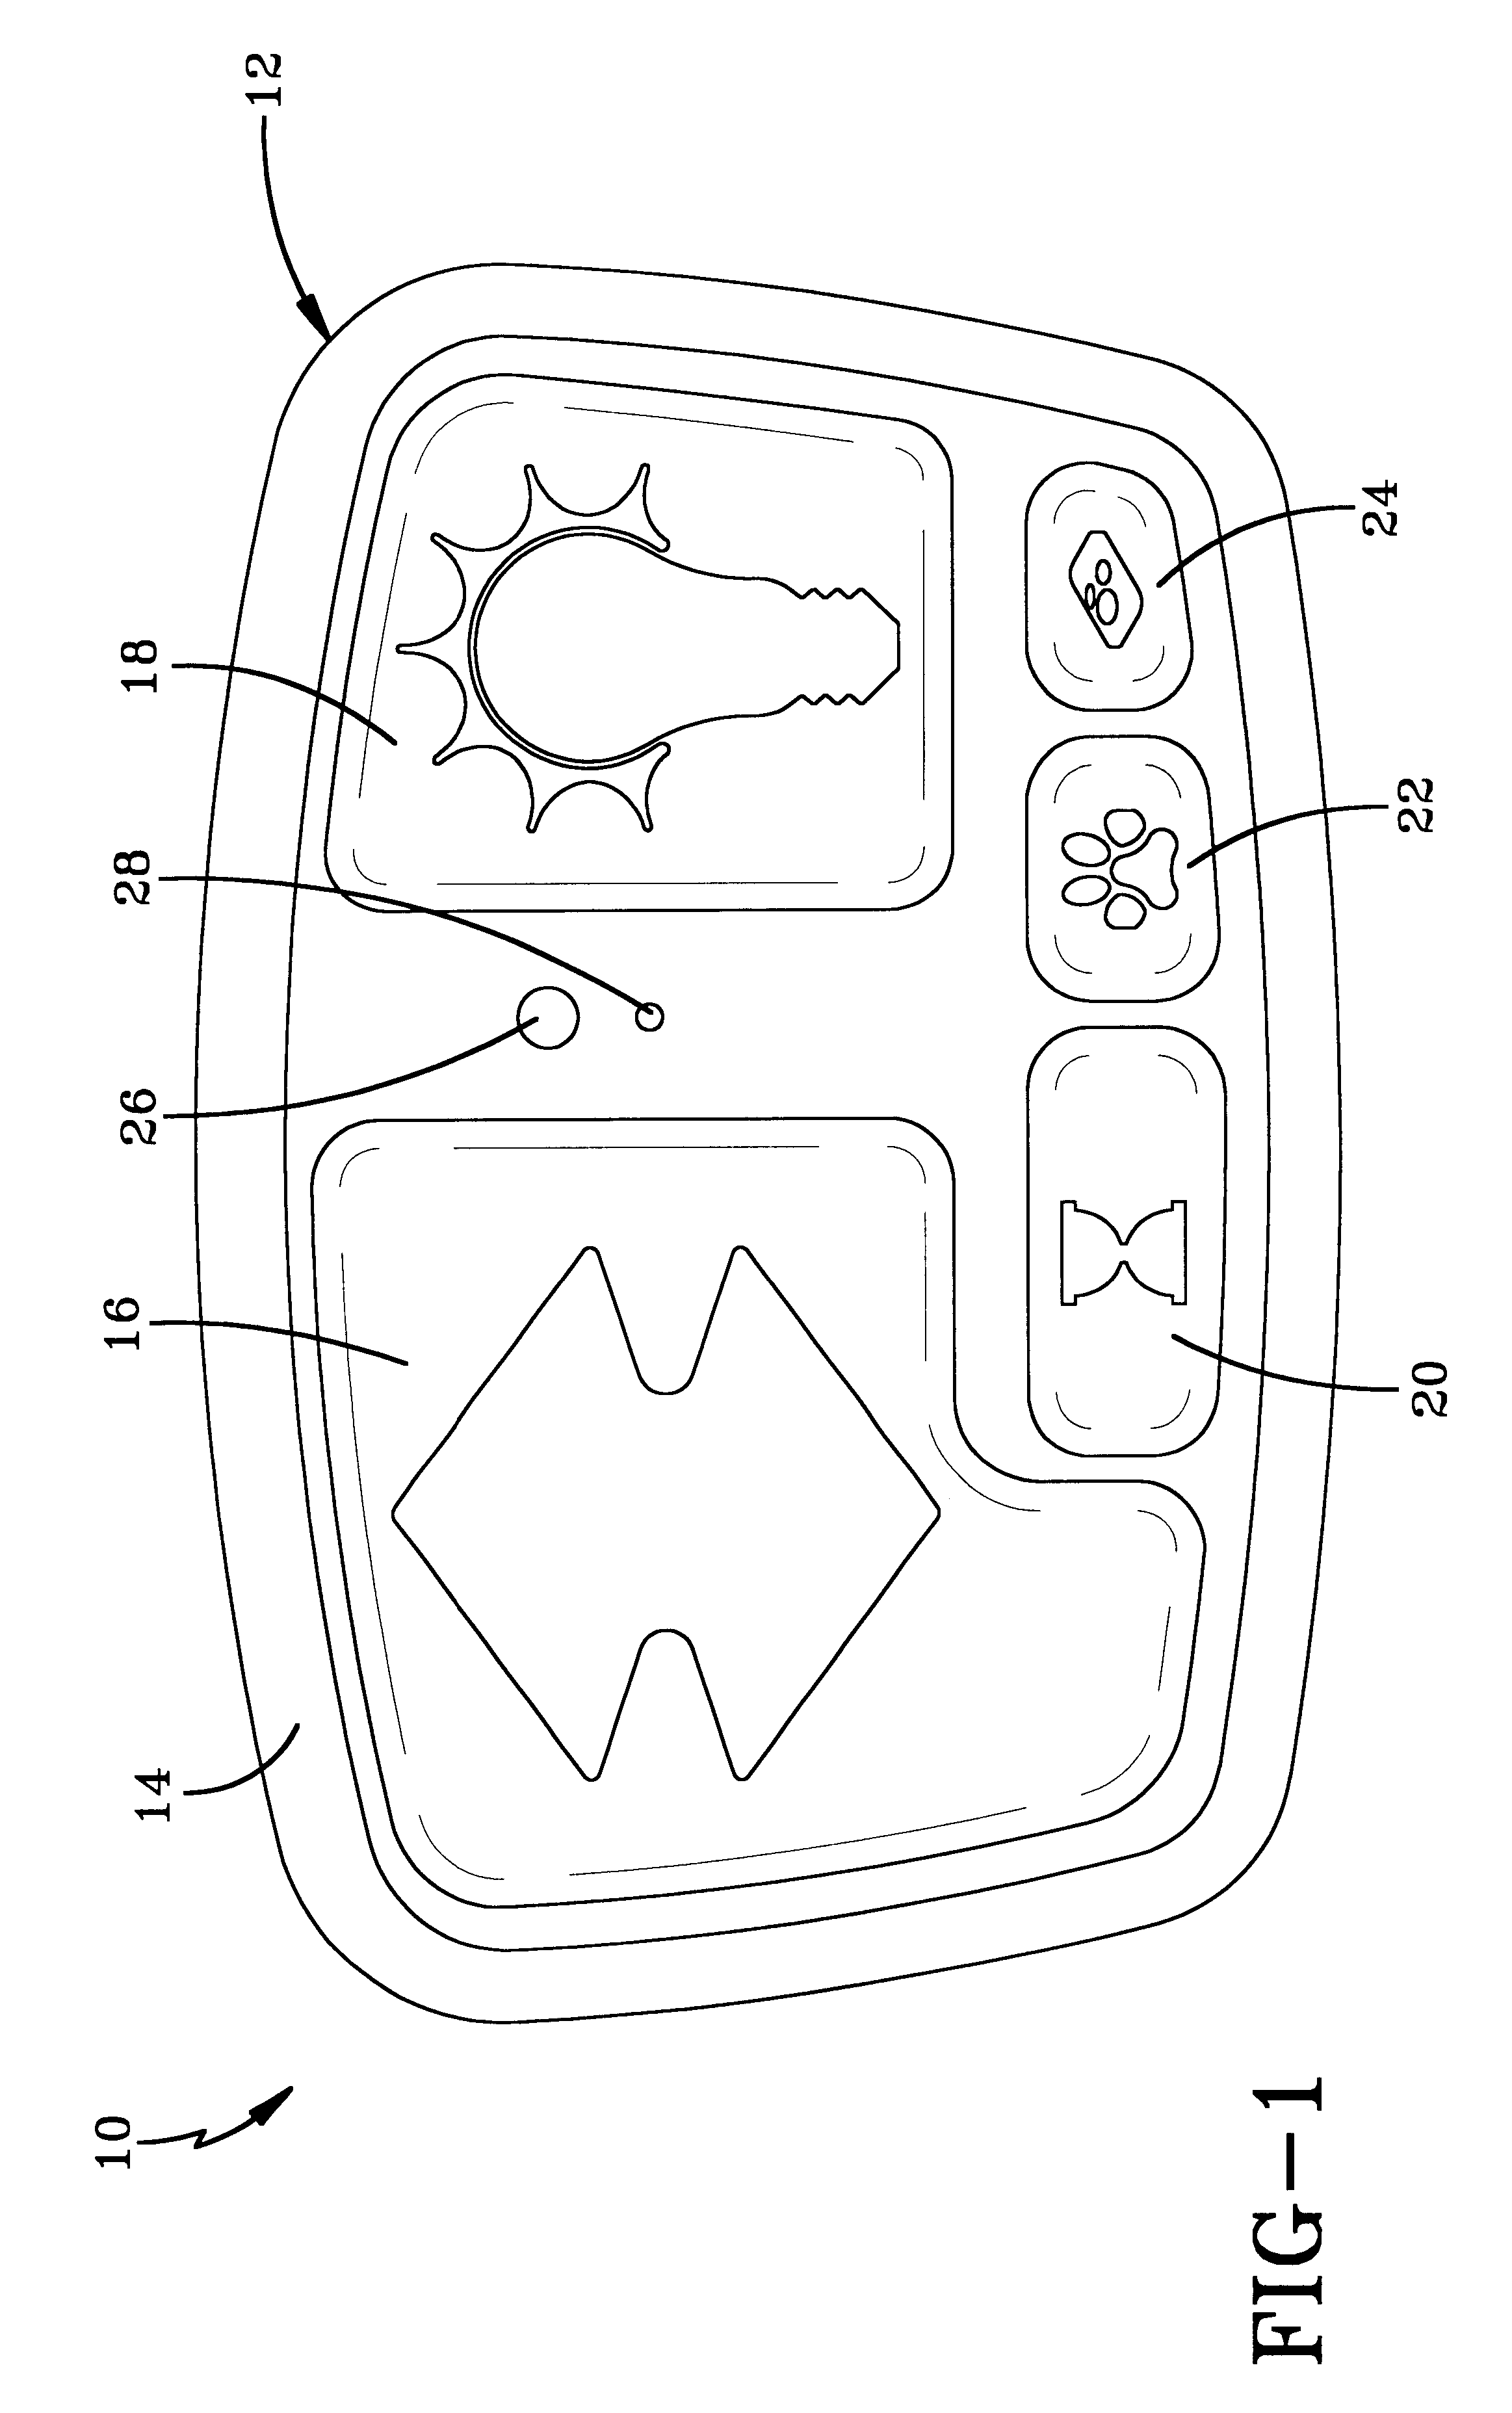 Wireless operating system utilizing a multi-functional wall station transmitter for a motorized door or gate operator